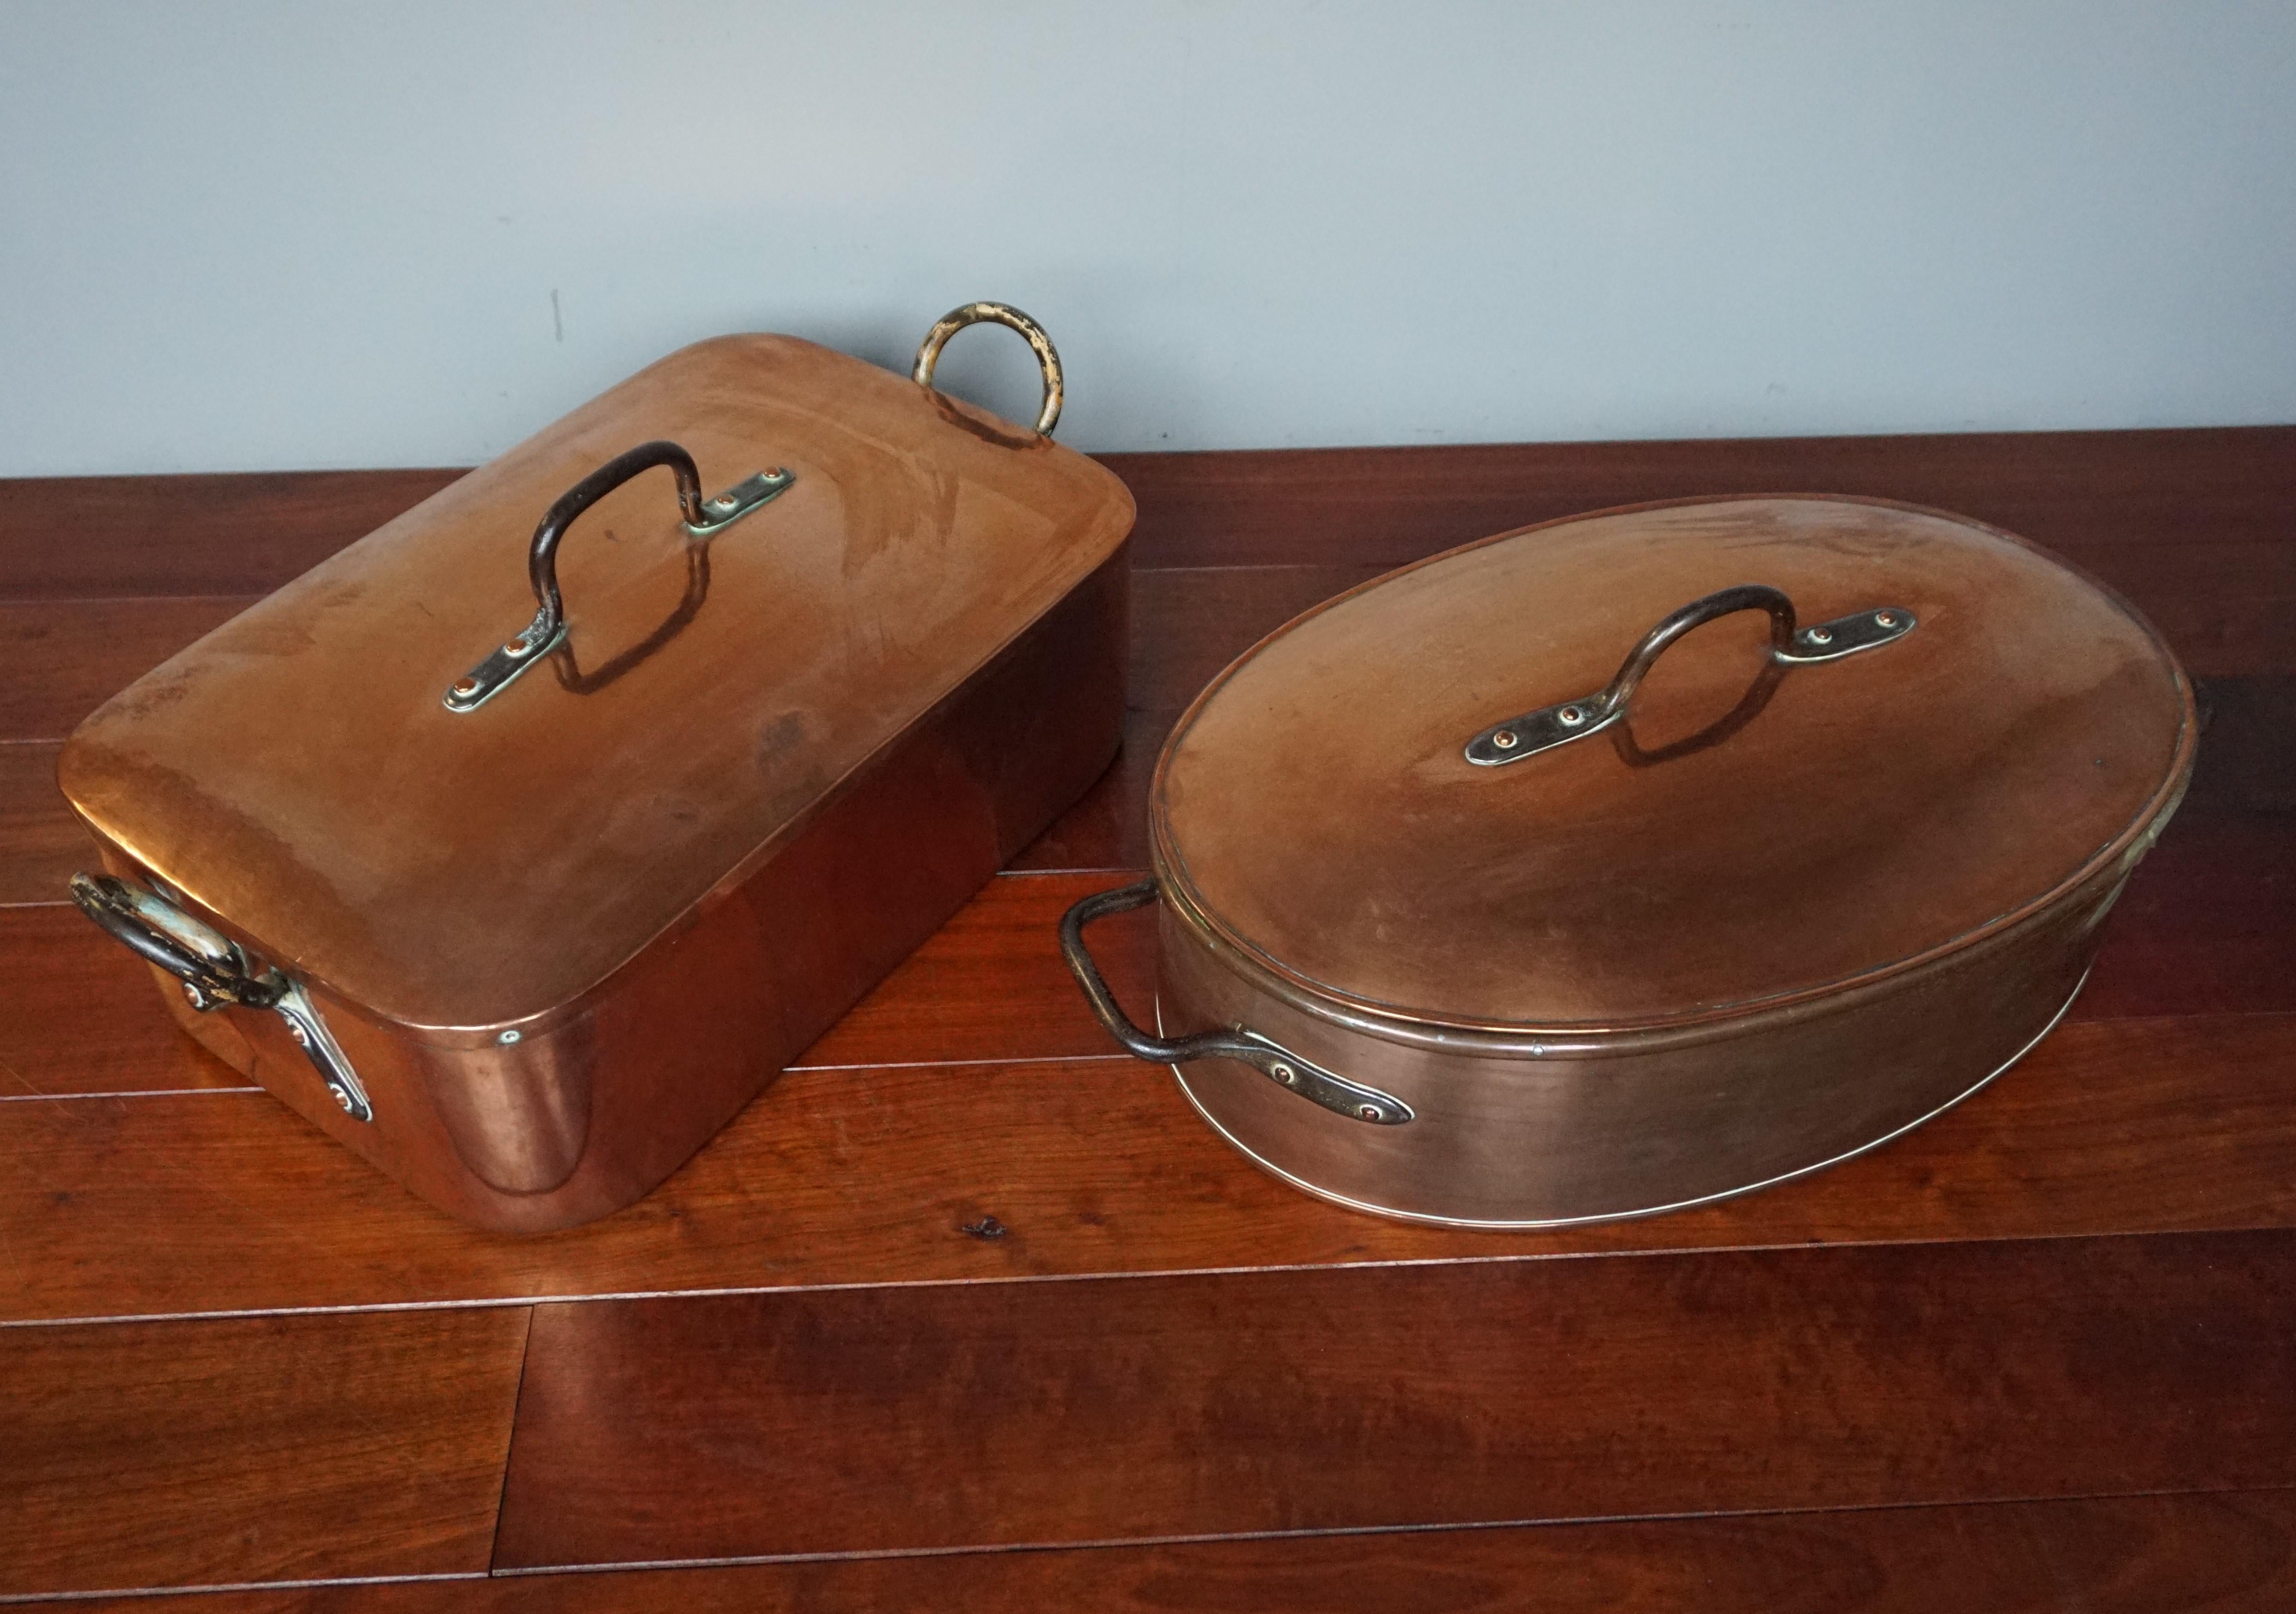 Extremely rare pair of top quality handcrafted, copper pans from the late 1700s or early 1800s.

These enormous and amazing antique pans are the largest we have ever seen and to have found a pair that have been together for at least 200 years was